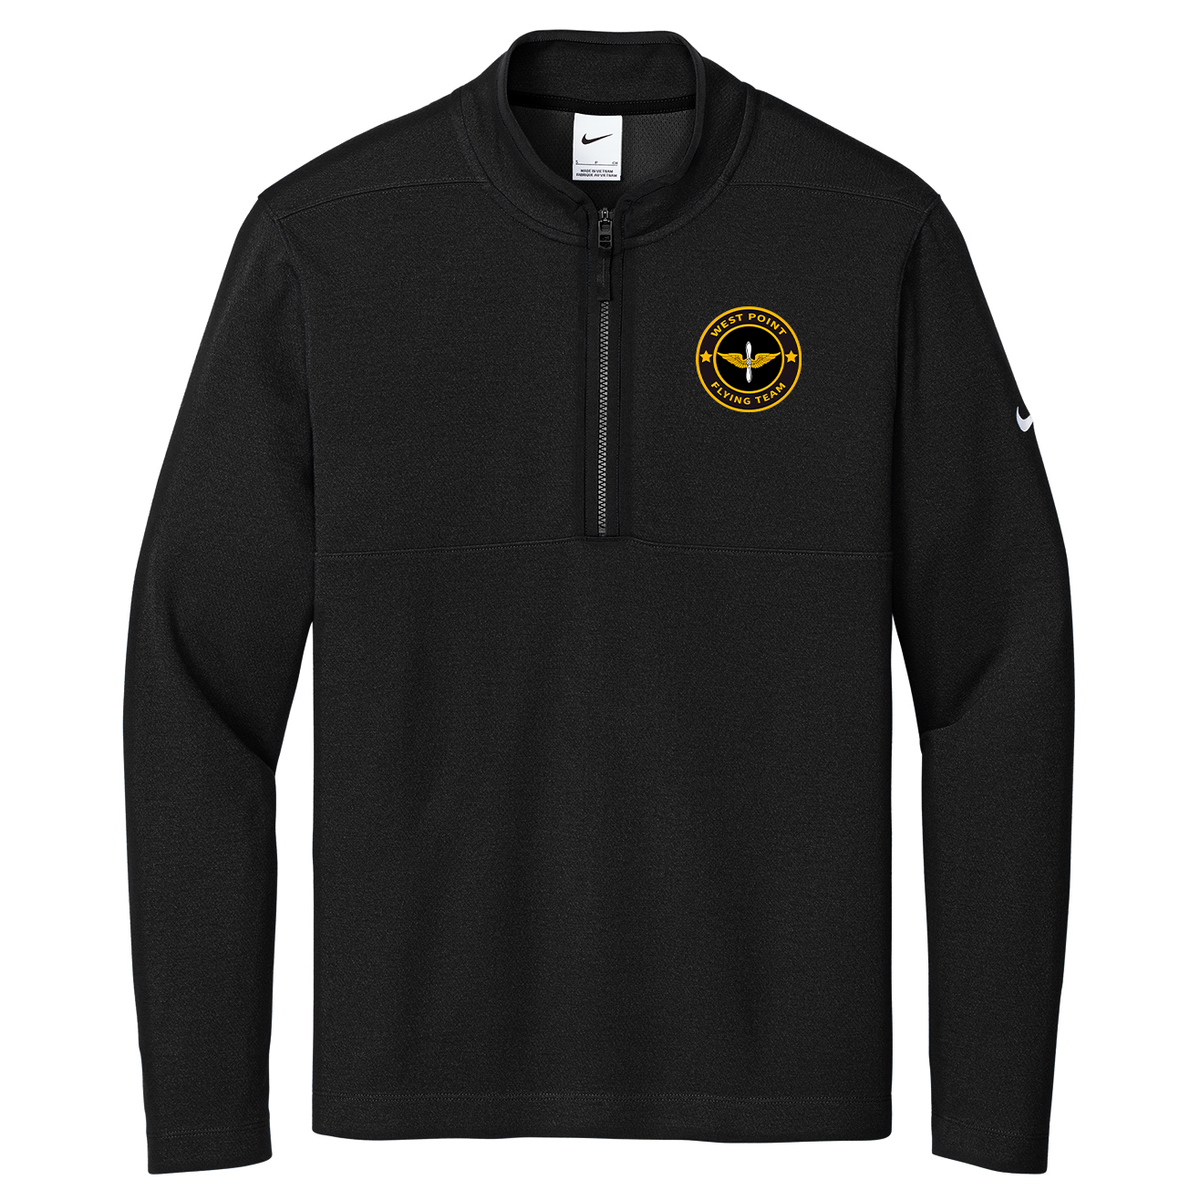 West Point Flight Team Nike Textured 1/2-Zip Cover-Up